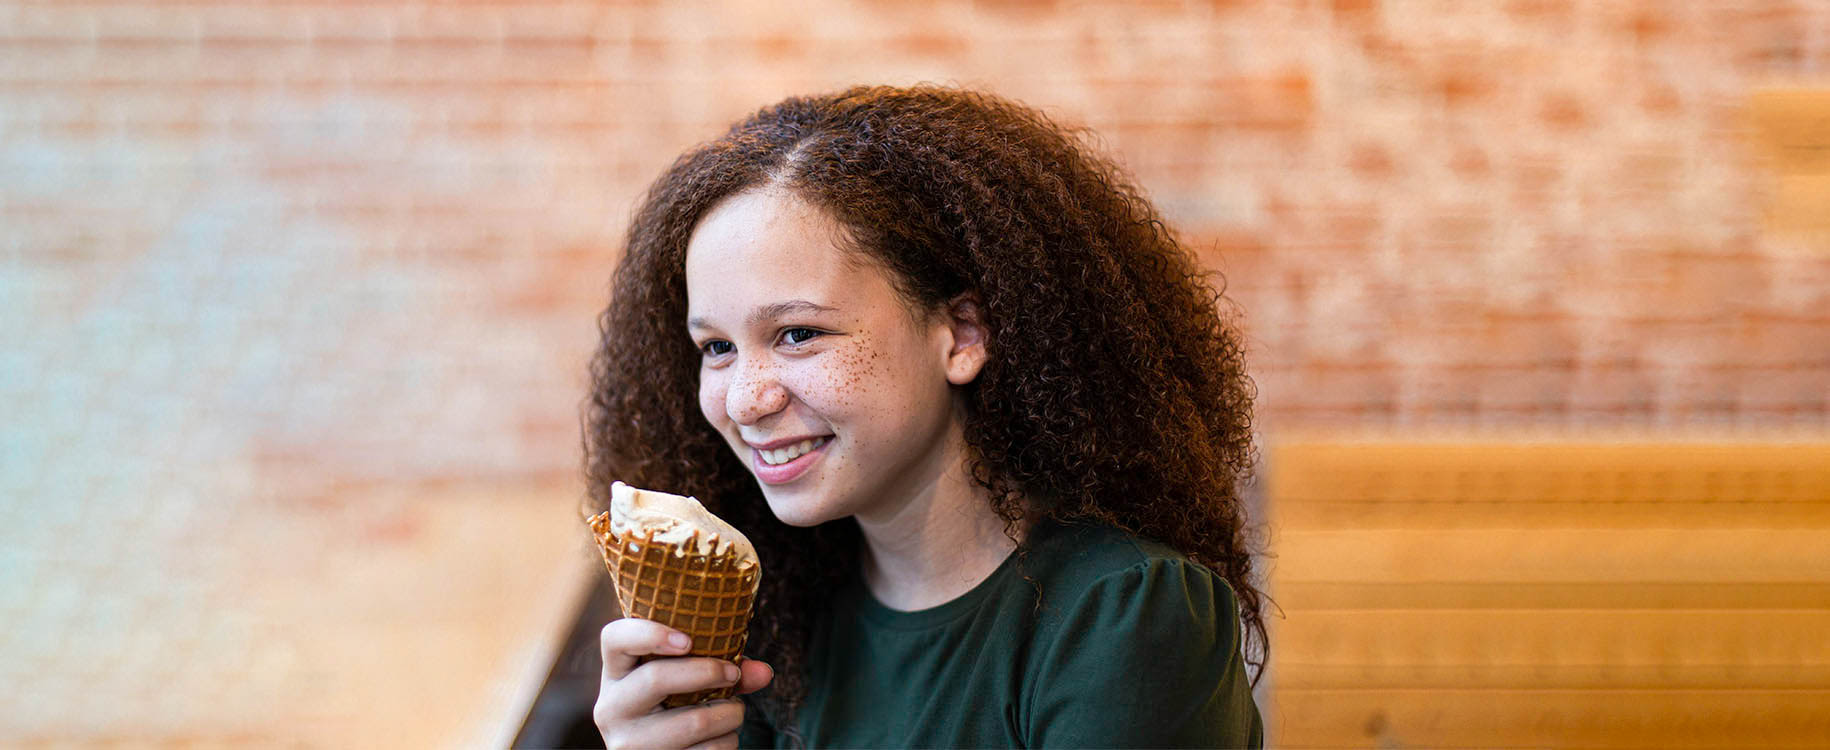 young girl eating ice cream in a shop.